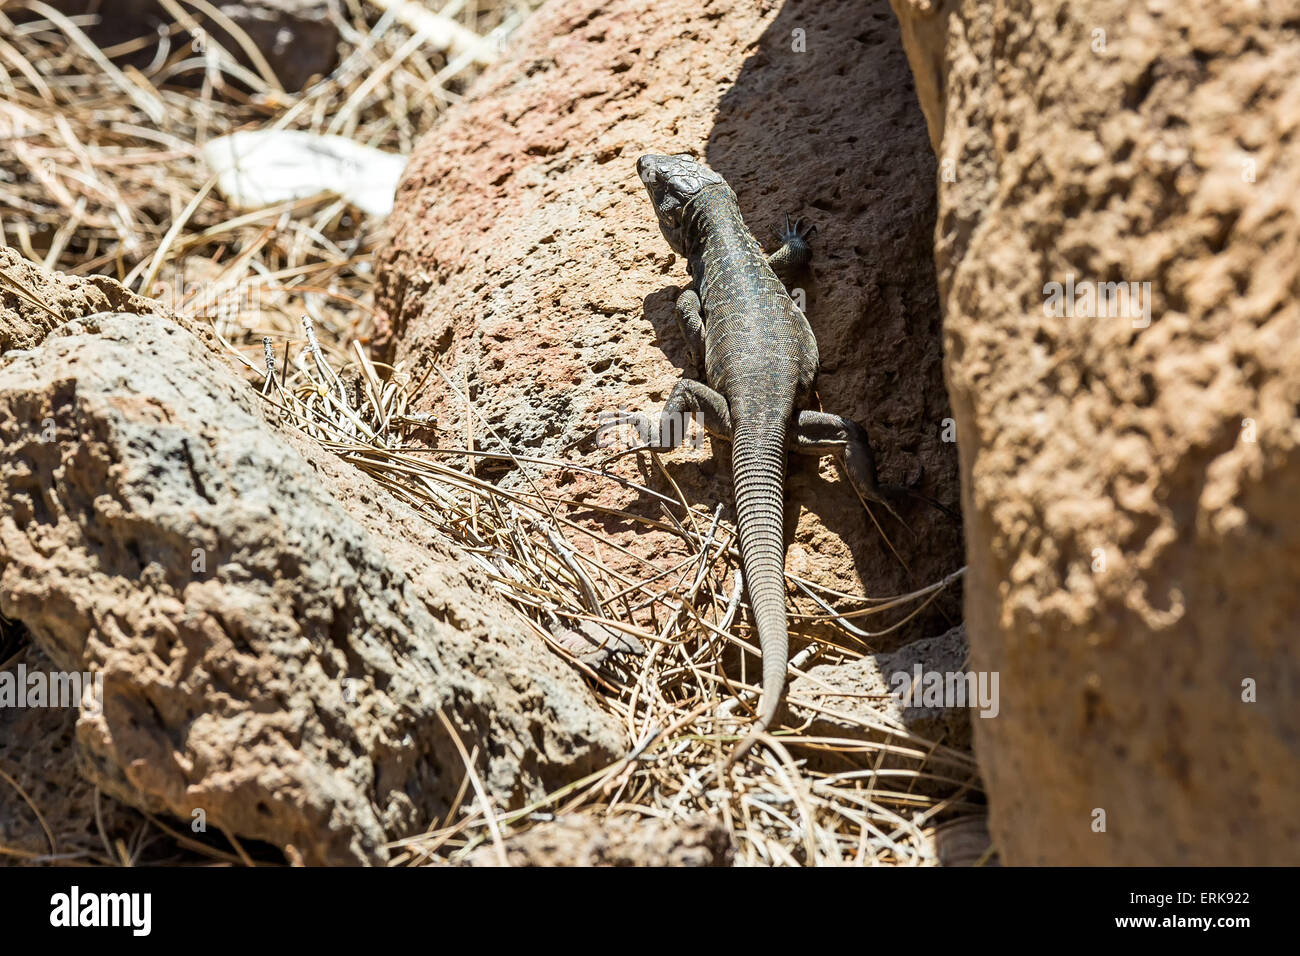 Lizard or lacertian reptile sitting on ground with dry grass Stock Photo